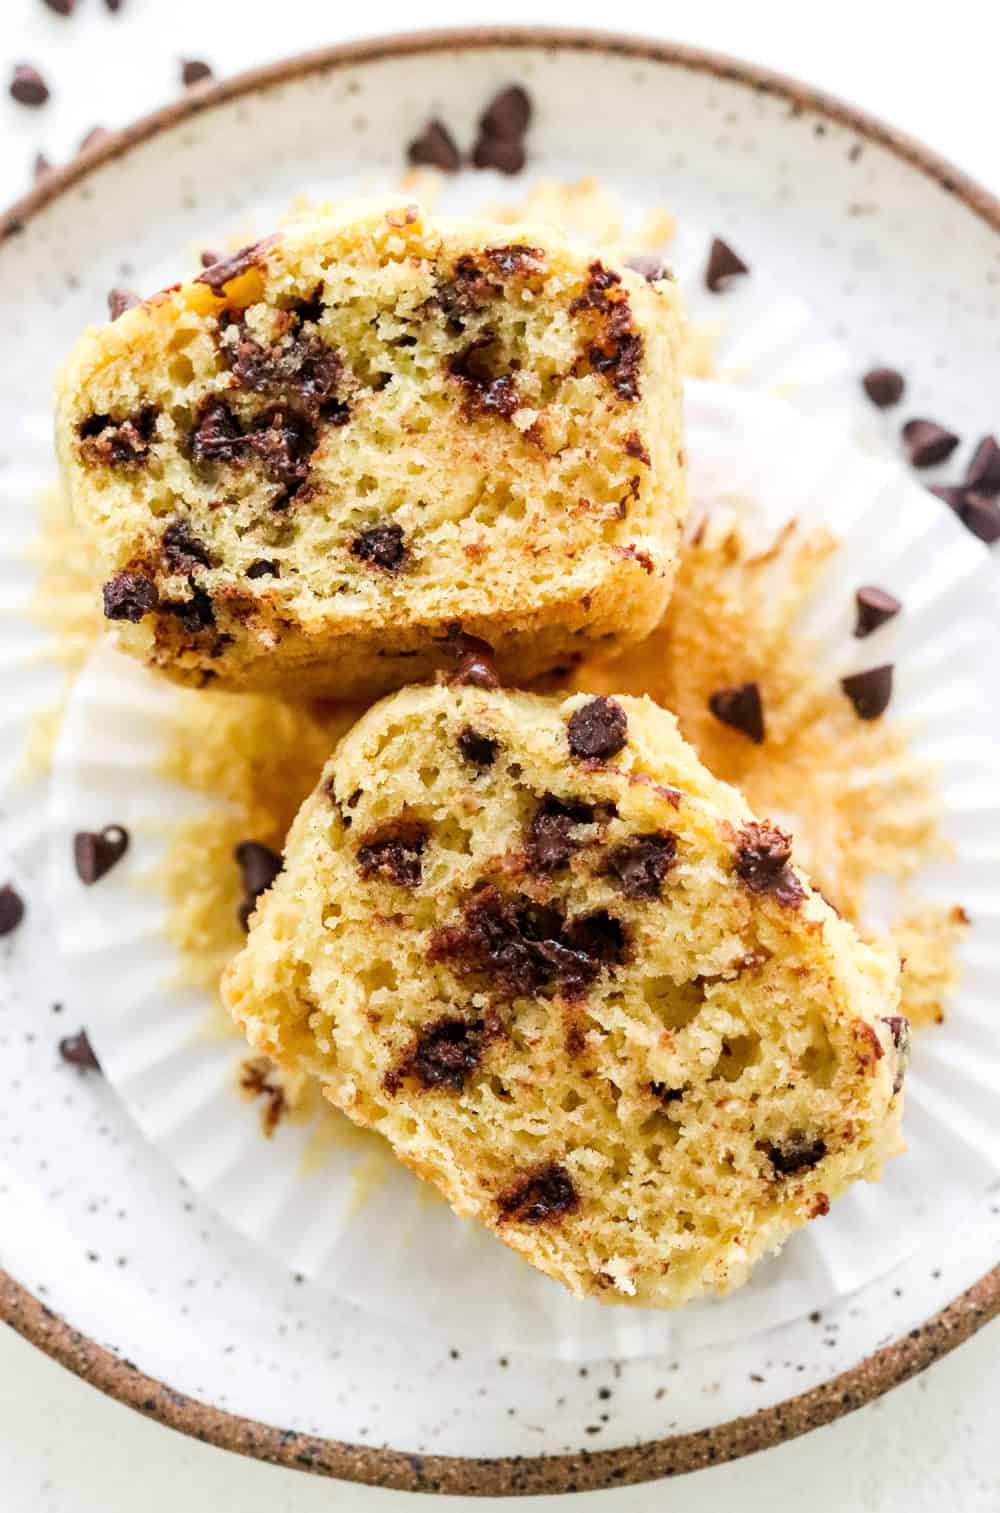 Chocolate chip muffin sliced open on a brown specked plate with chocolate chips sprinkled on the plate.